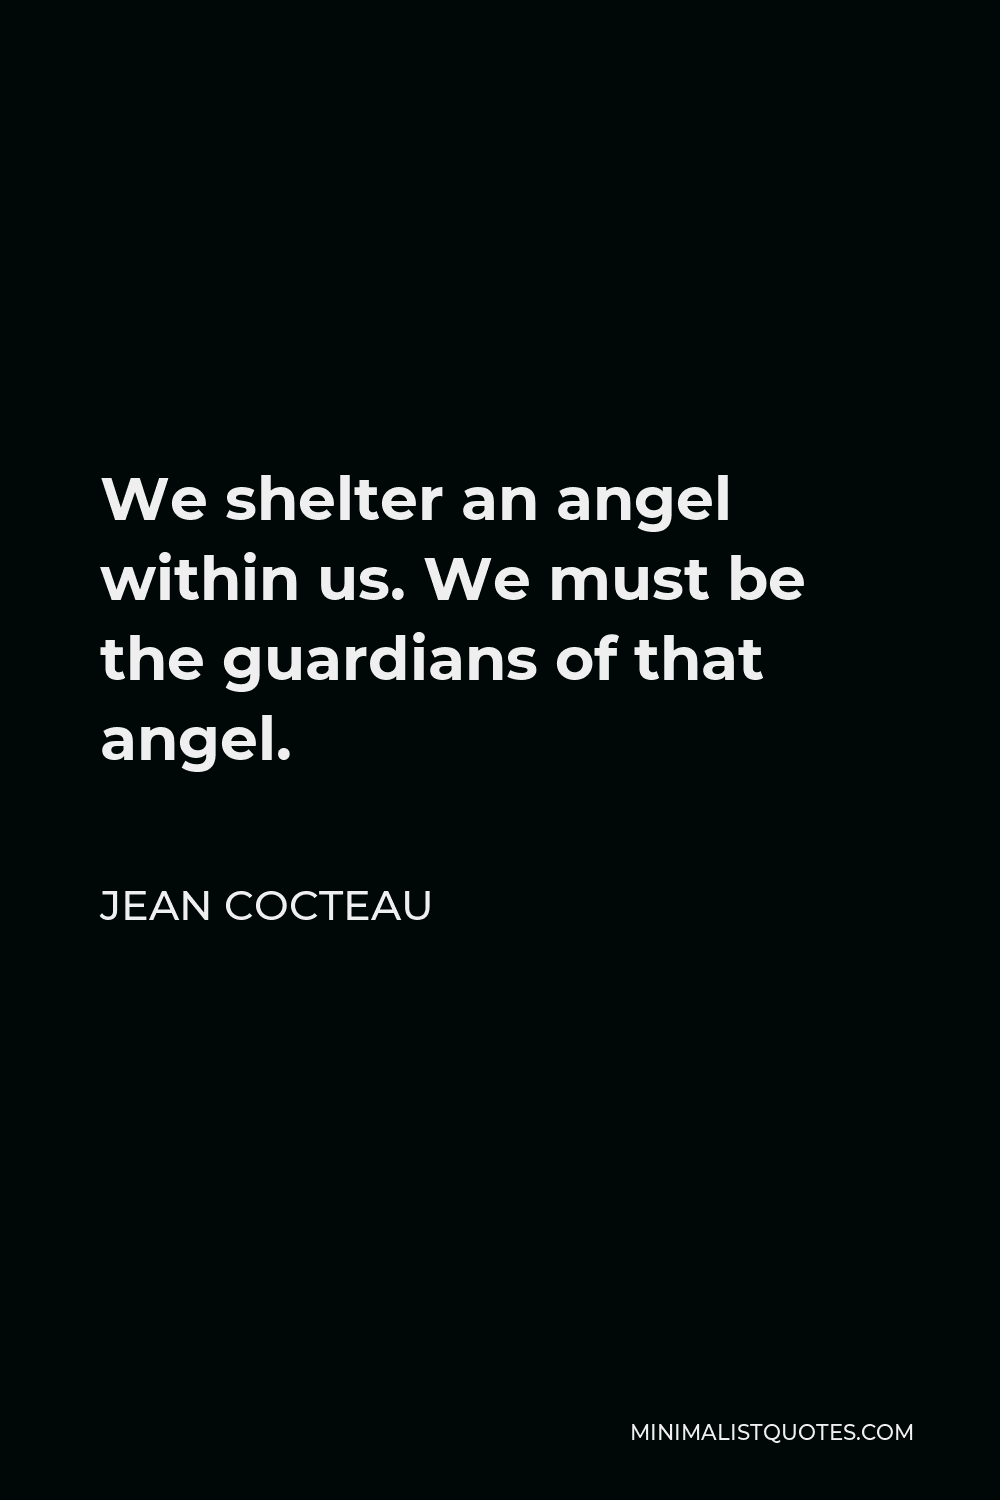 Jean Cocteau Quote - We shelter an angel within us. We must be the guardians of that angel.